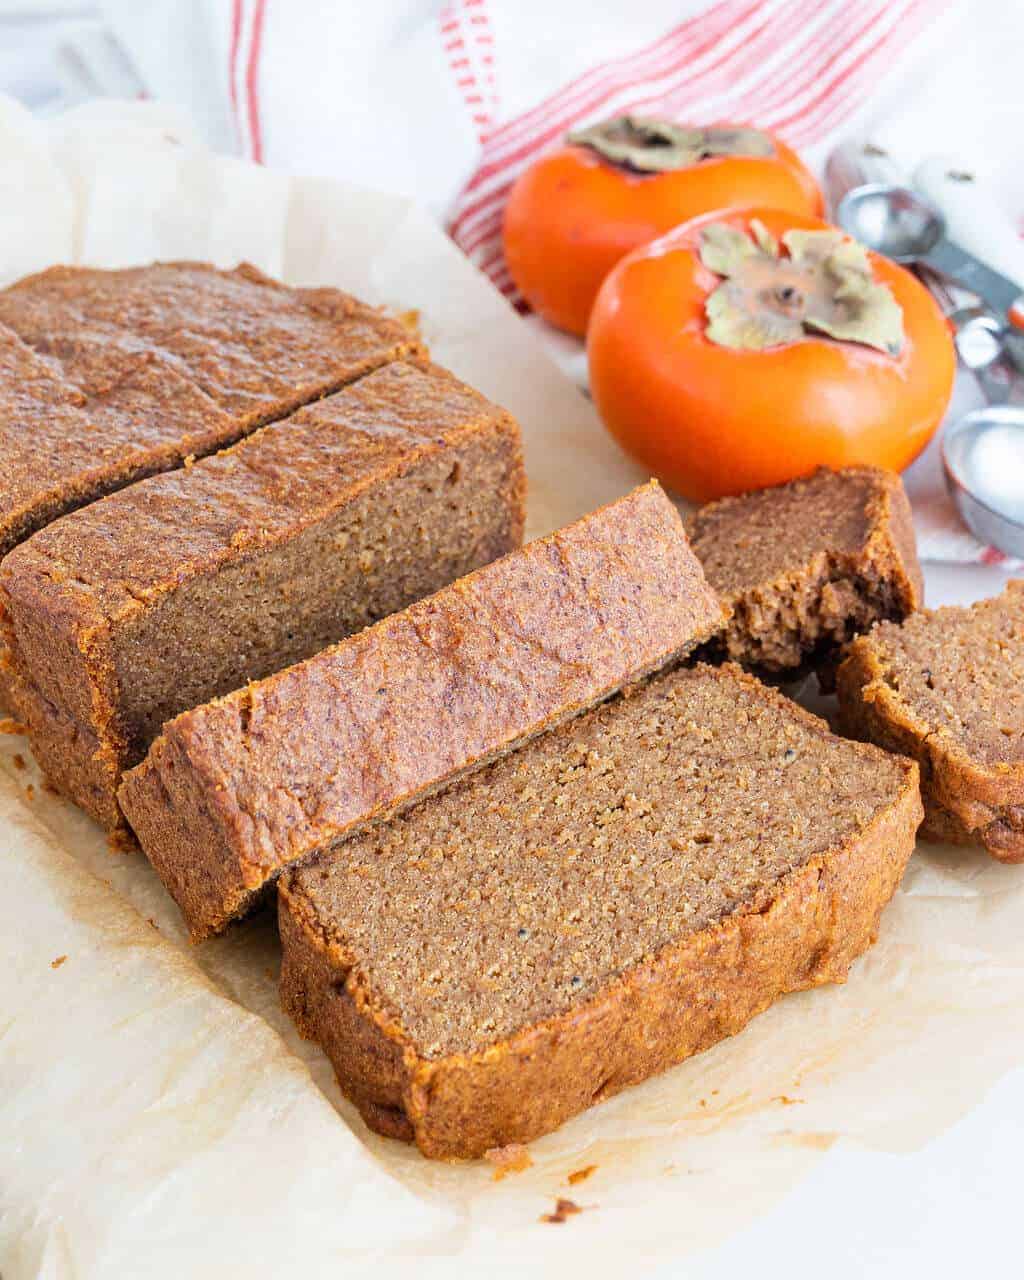 persimmon bread slices on a white surface with persimmons in the background